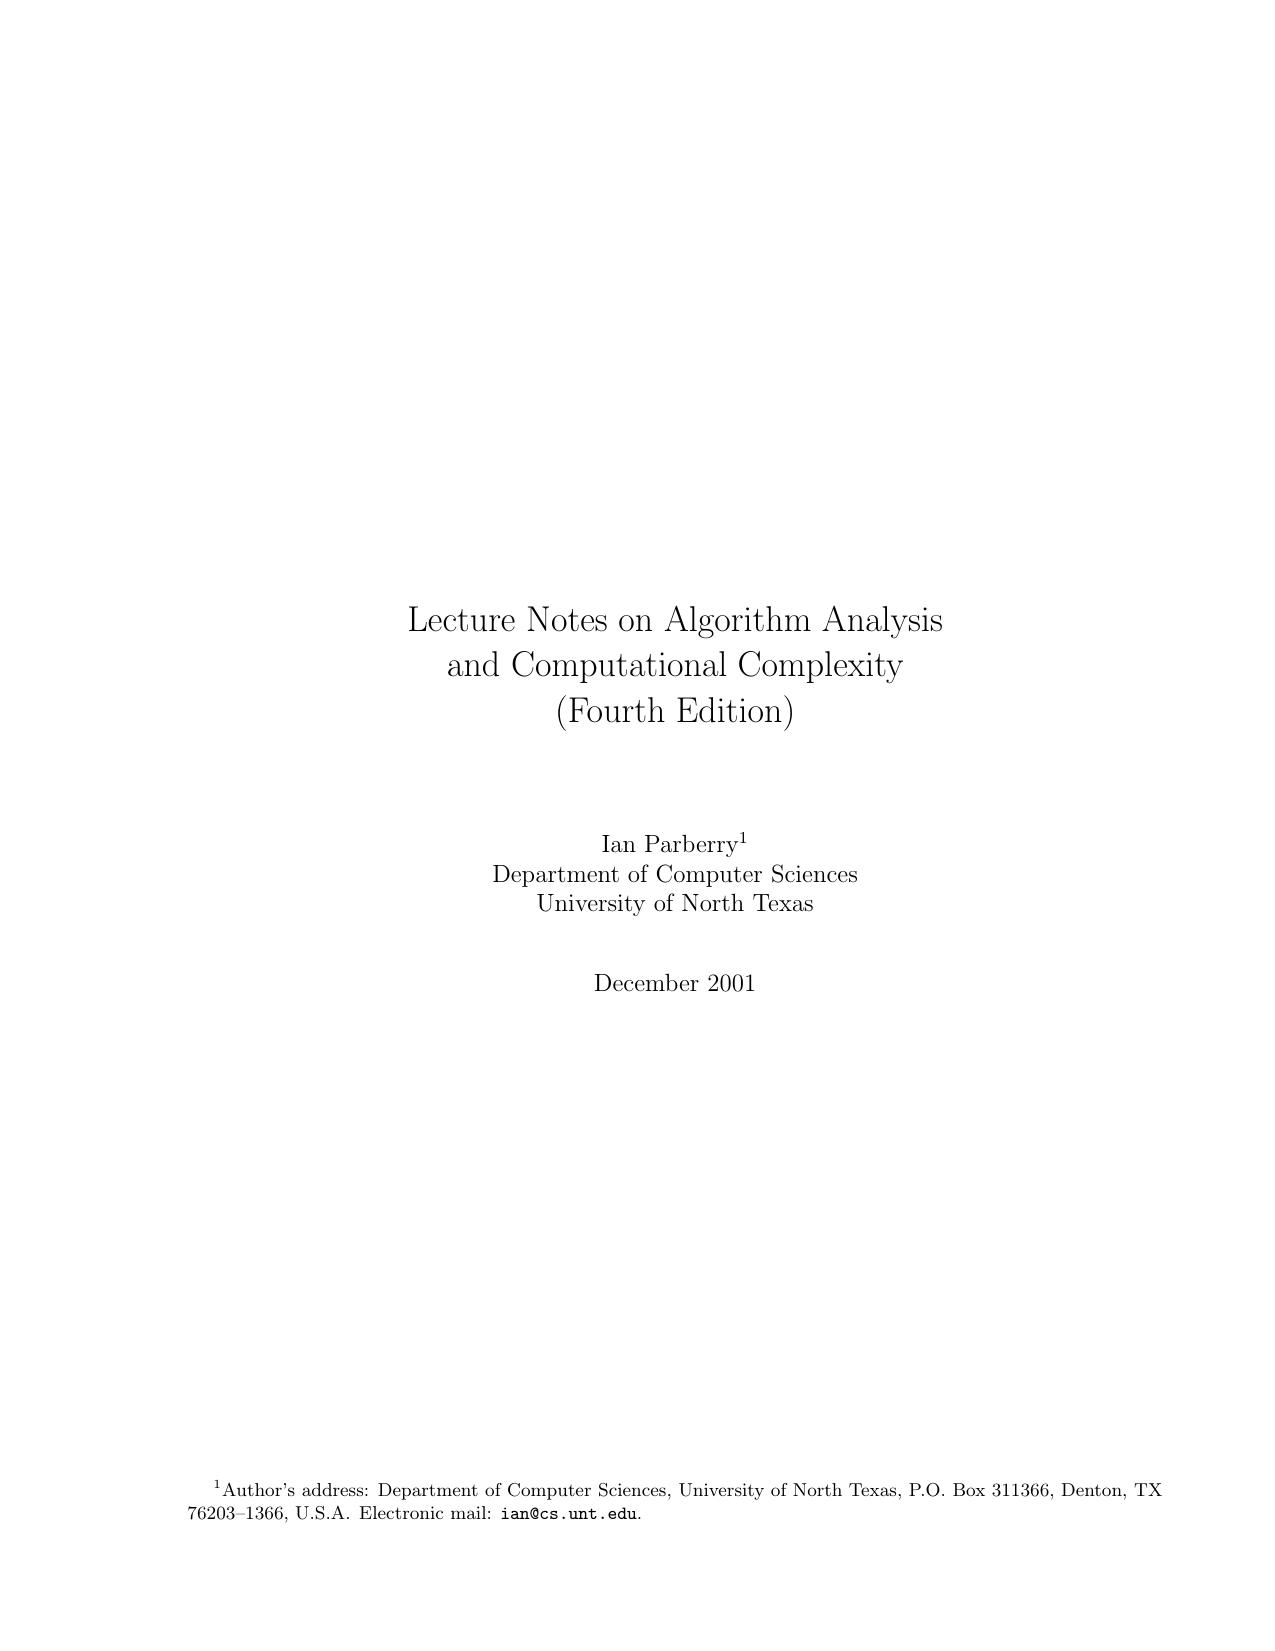 Lecture Notes on Algorithm Analysis and Complexity Theory